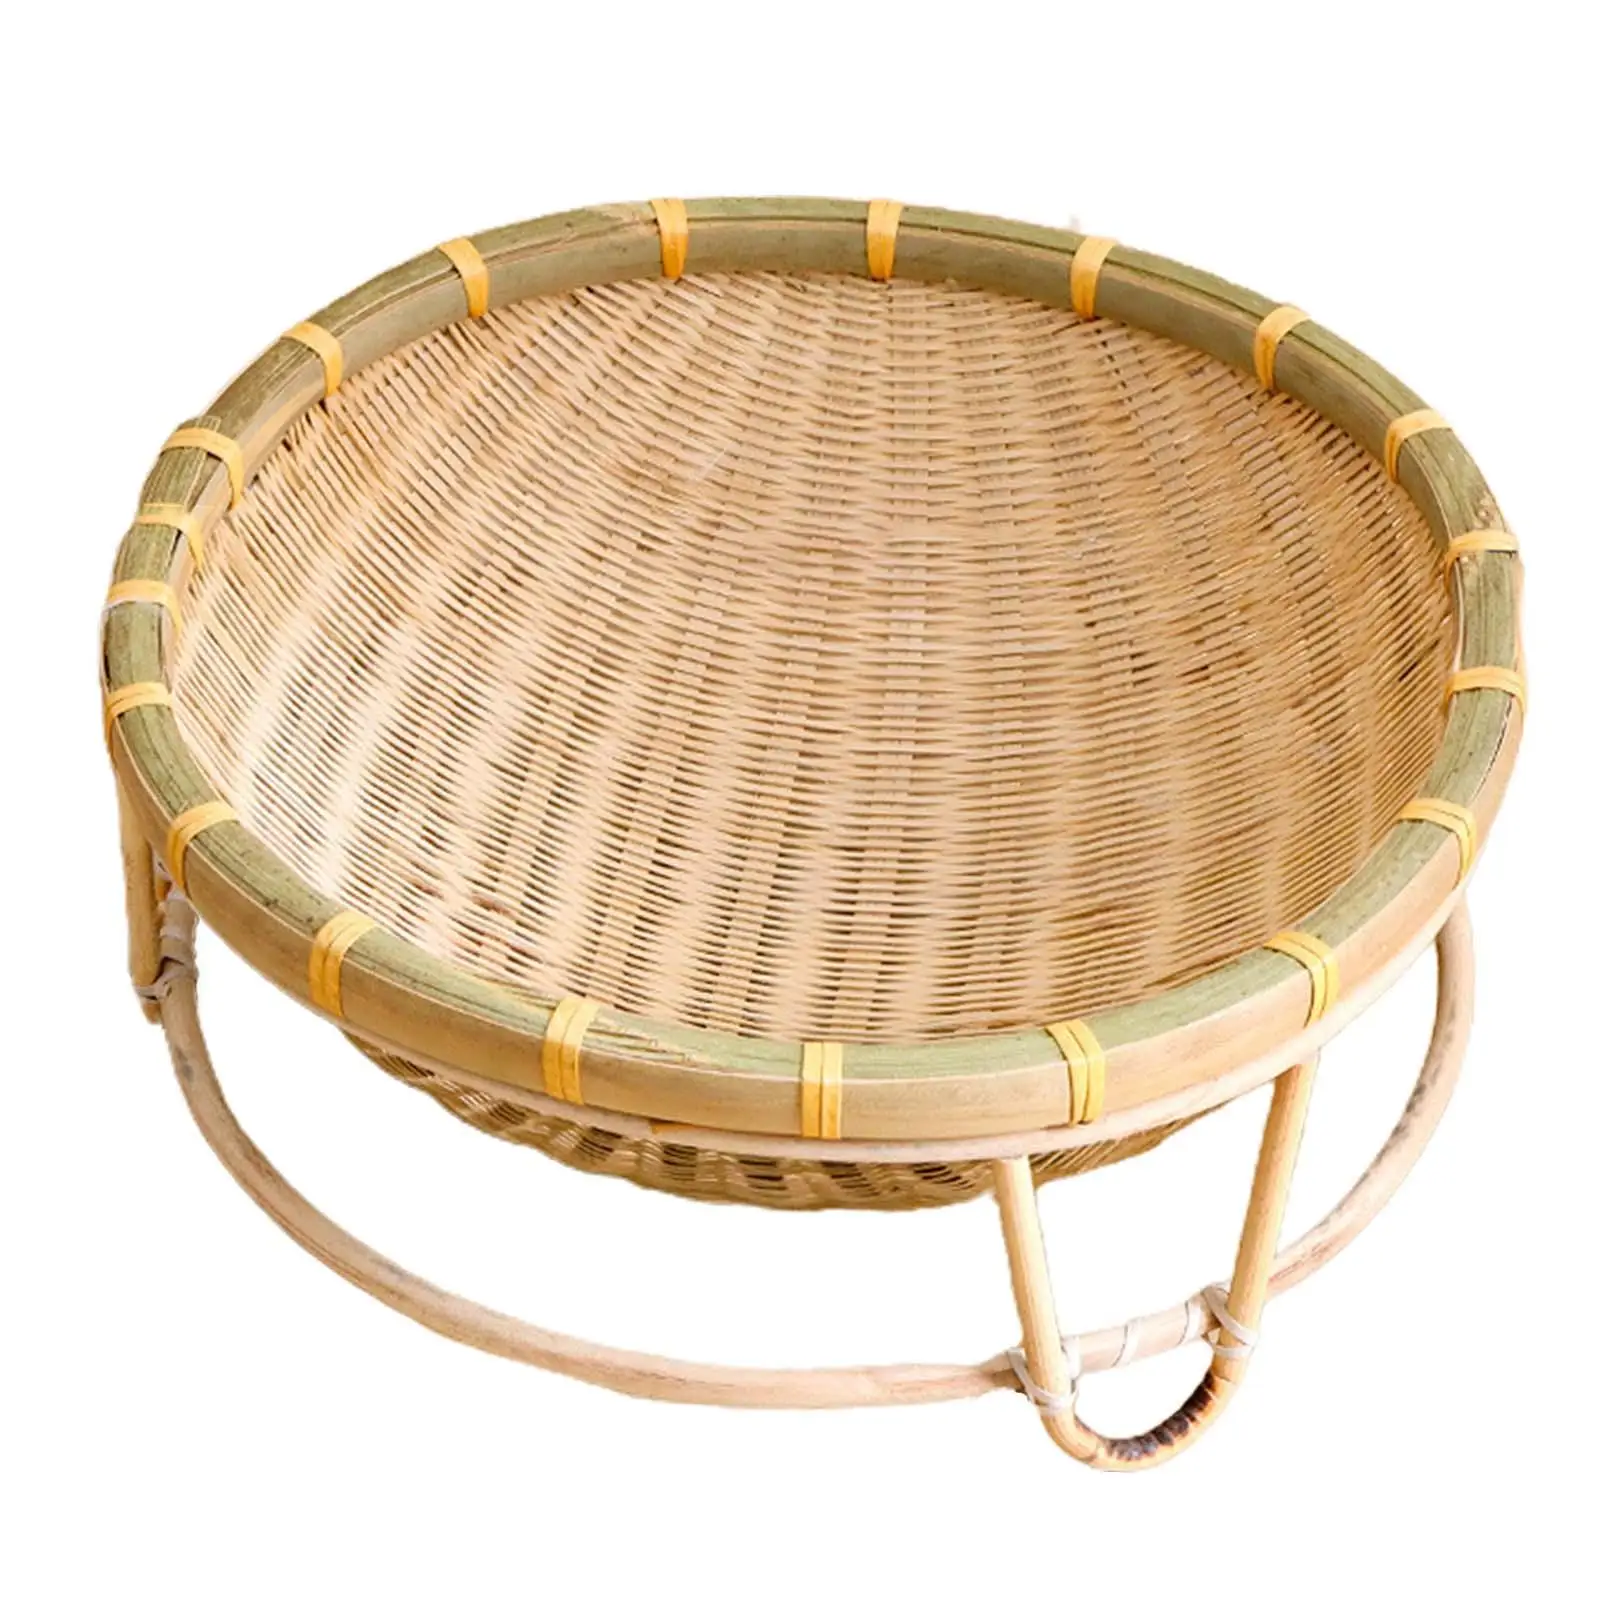 Bamboo Woven Cat Nest Lightweight Home Free Standing Semi Enclosed Cat Bed Portable for Puppy Small Medium Cats Kitten Supplies